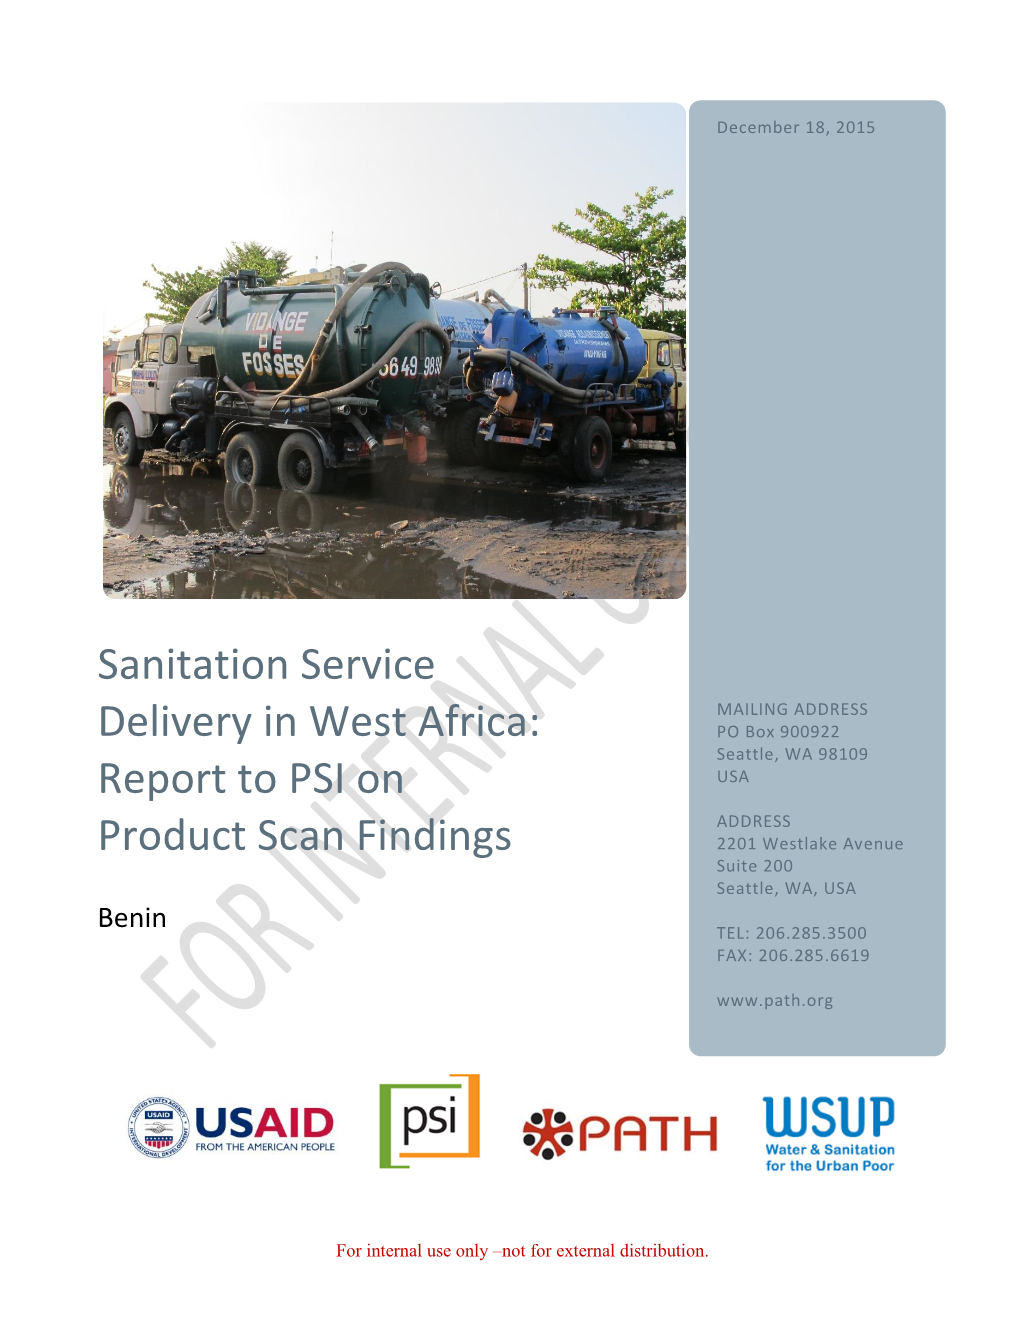 Sanitation Service Delivery in West Africa: Report to PSI on Product